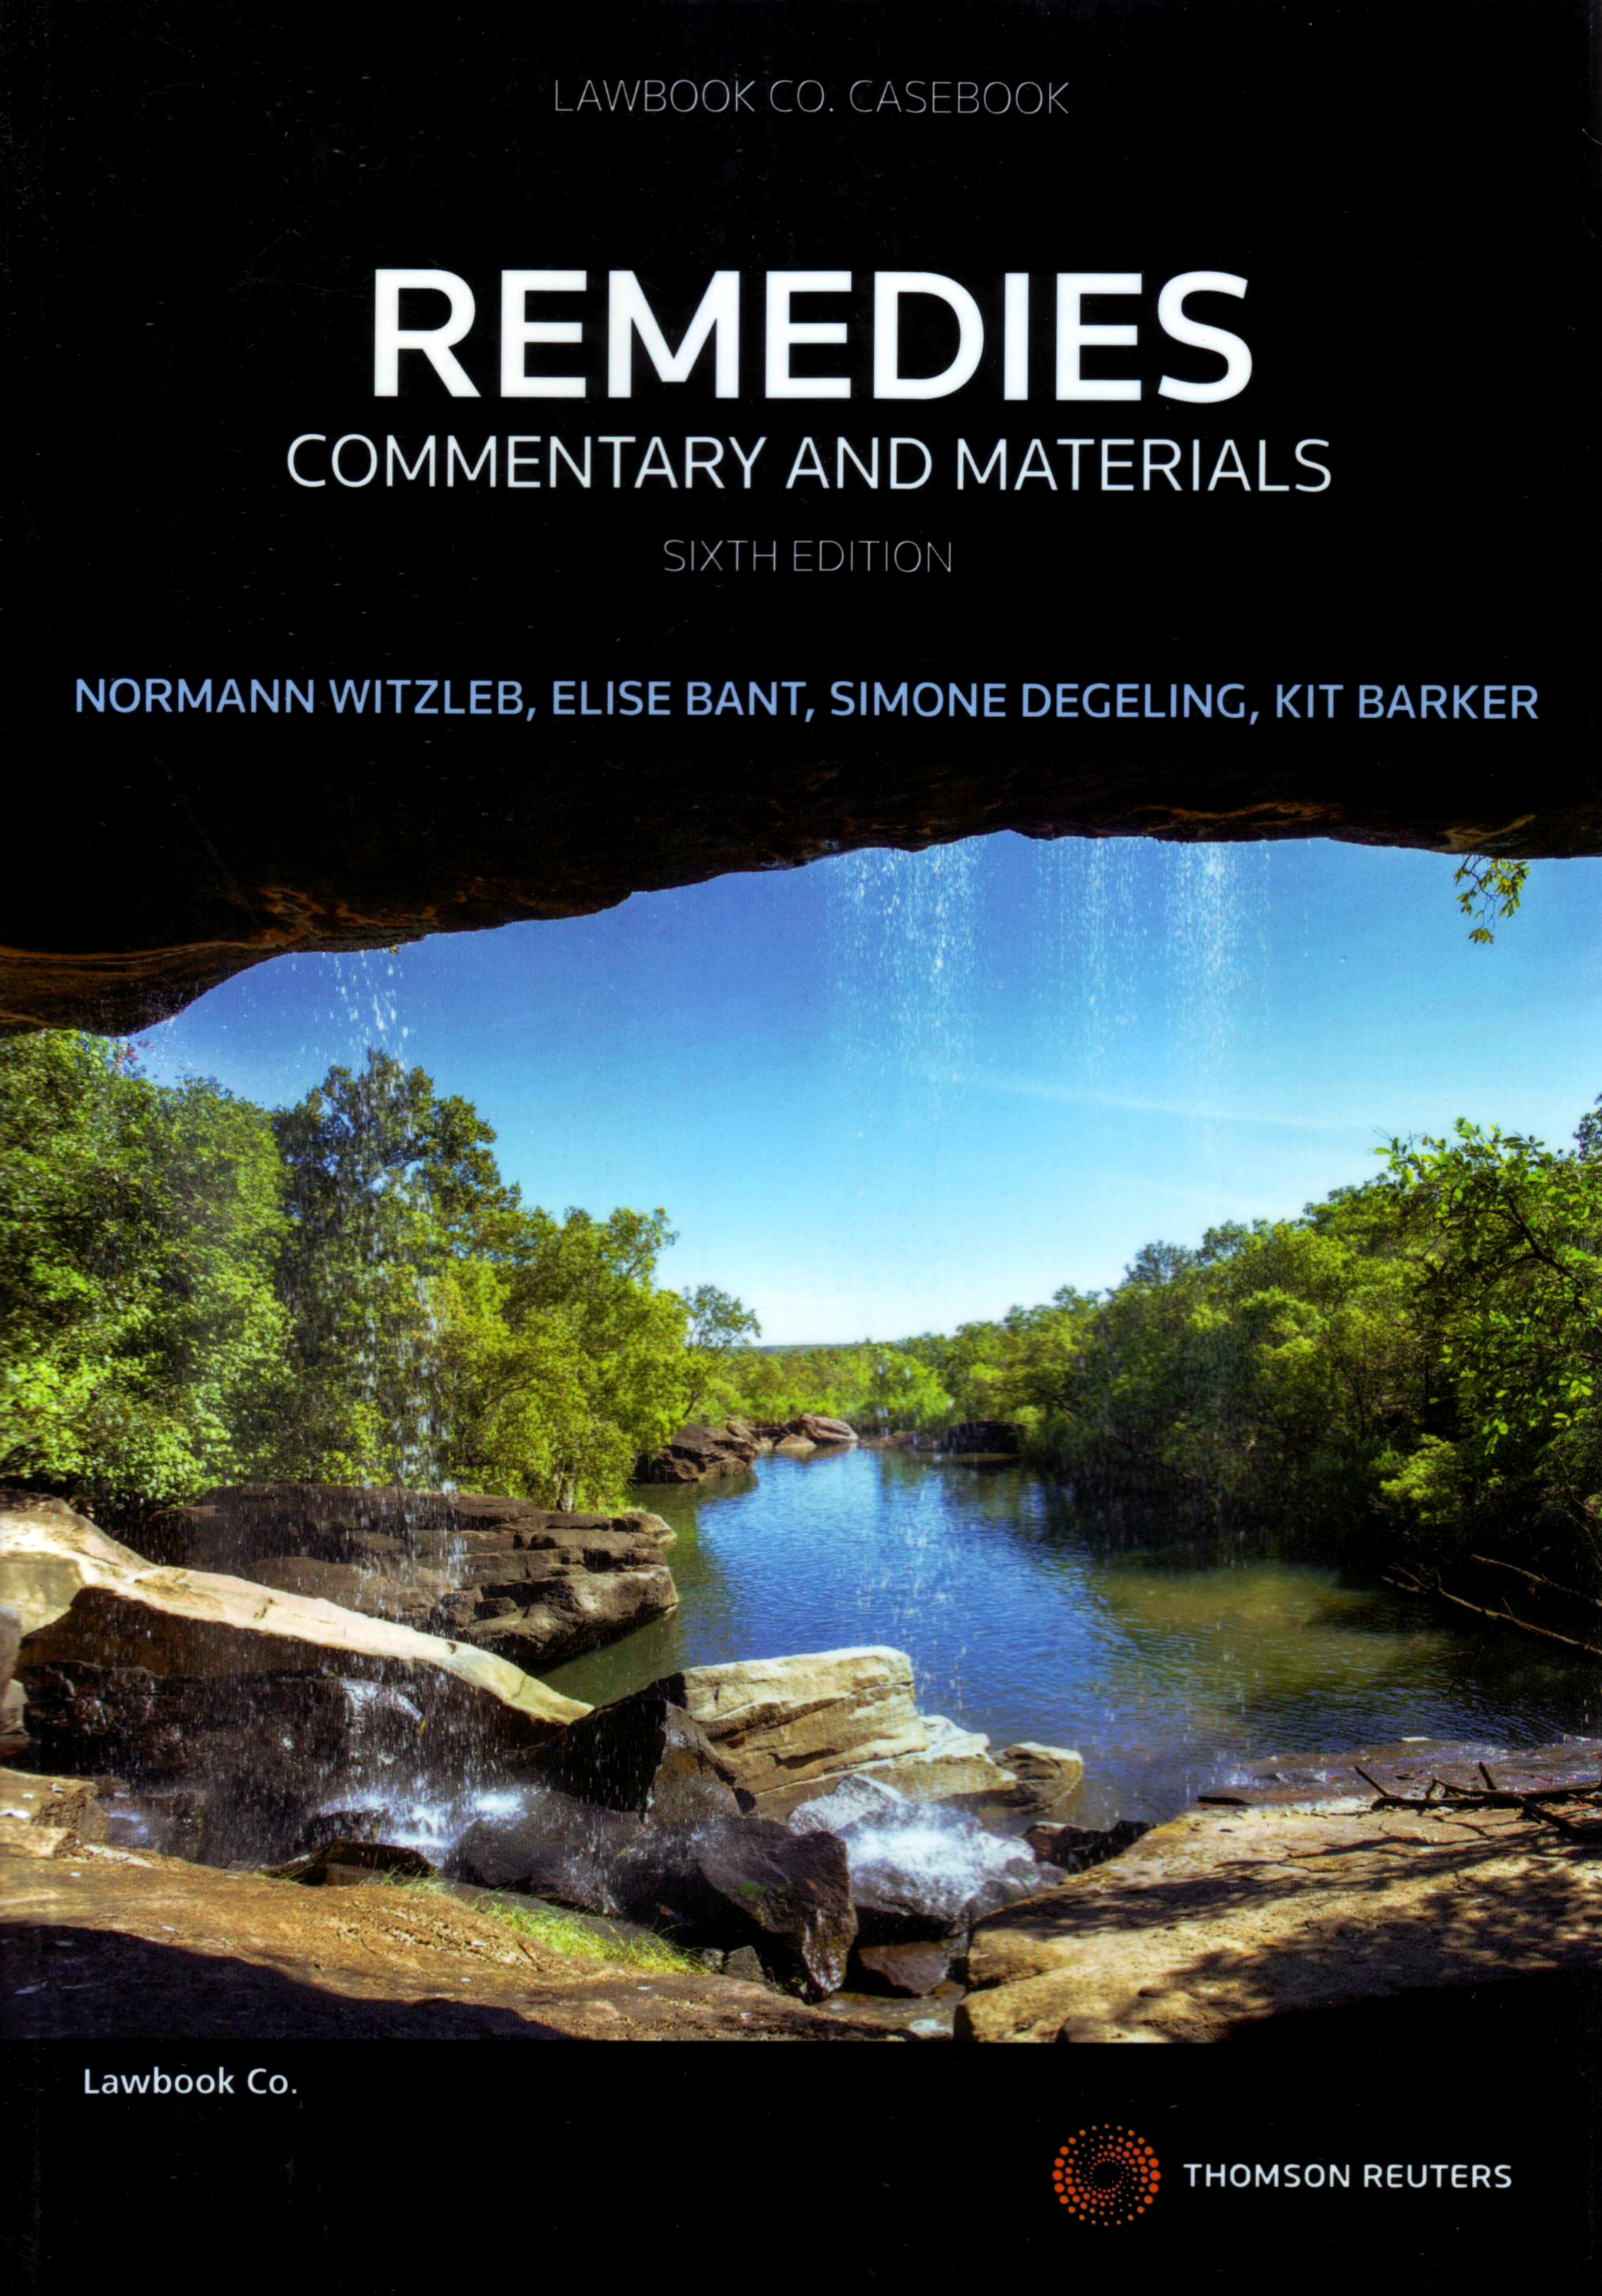 Remedies: Commentary and Materials e6